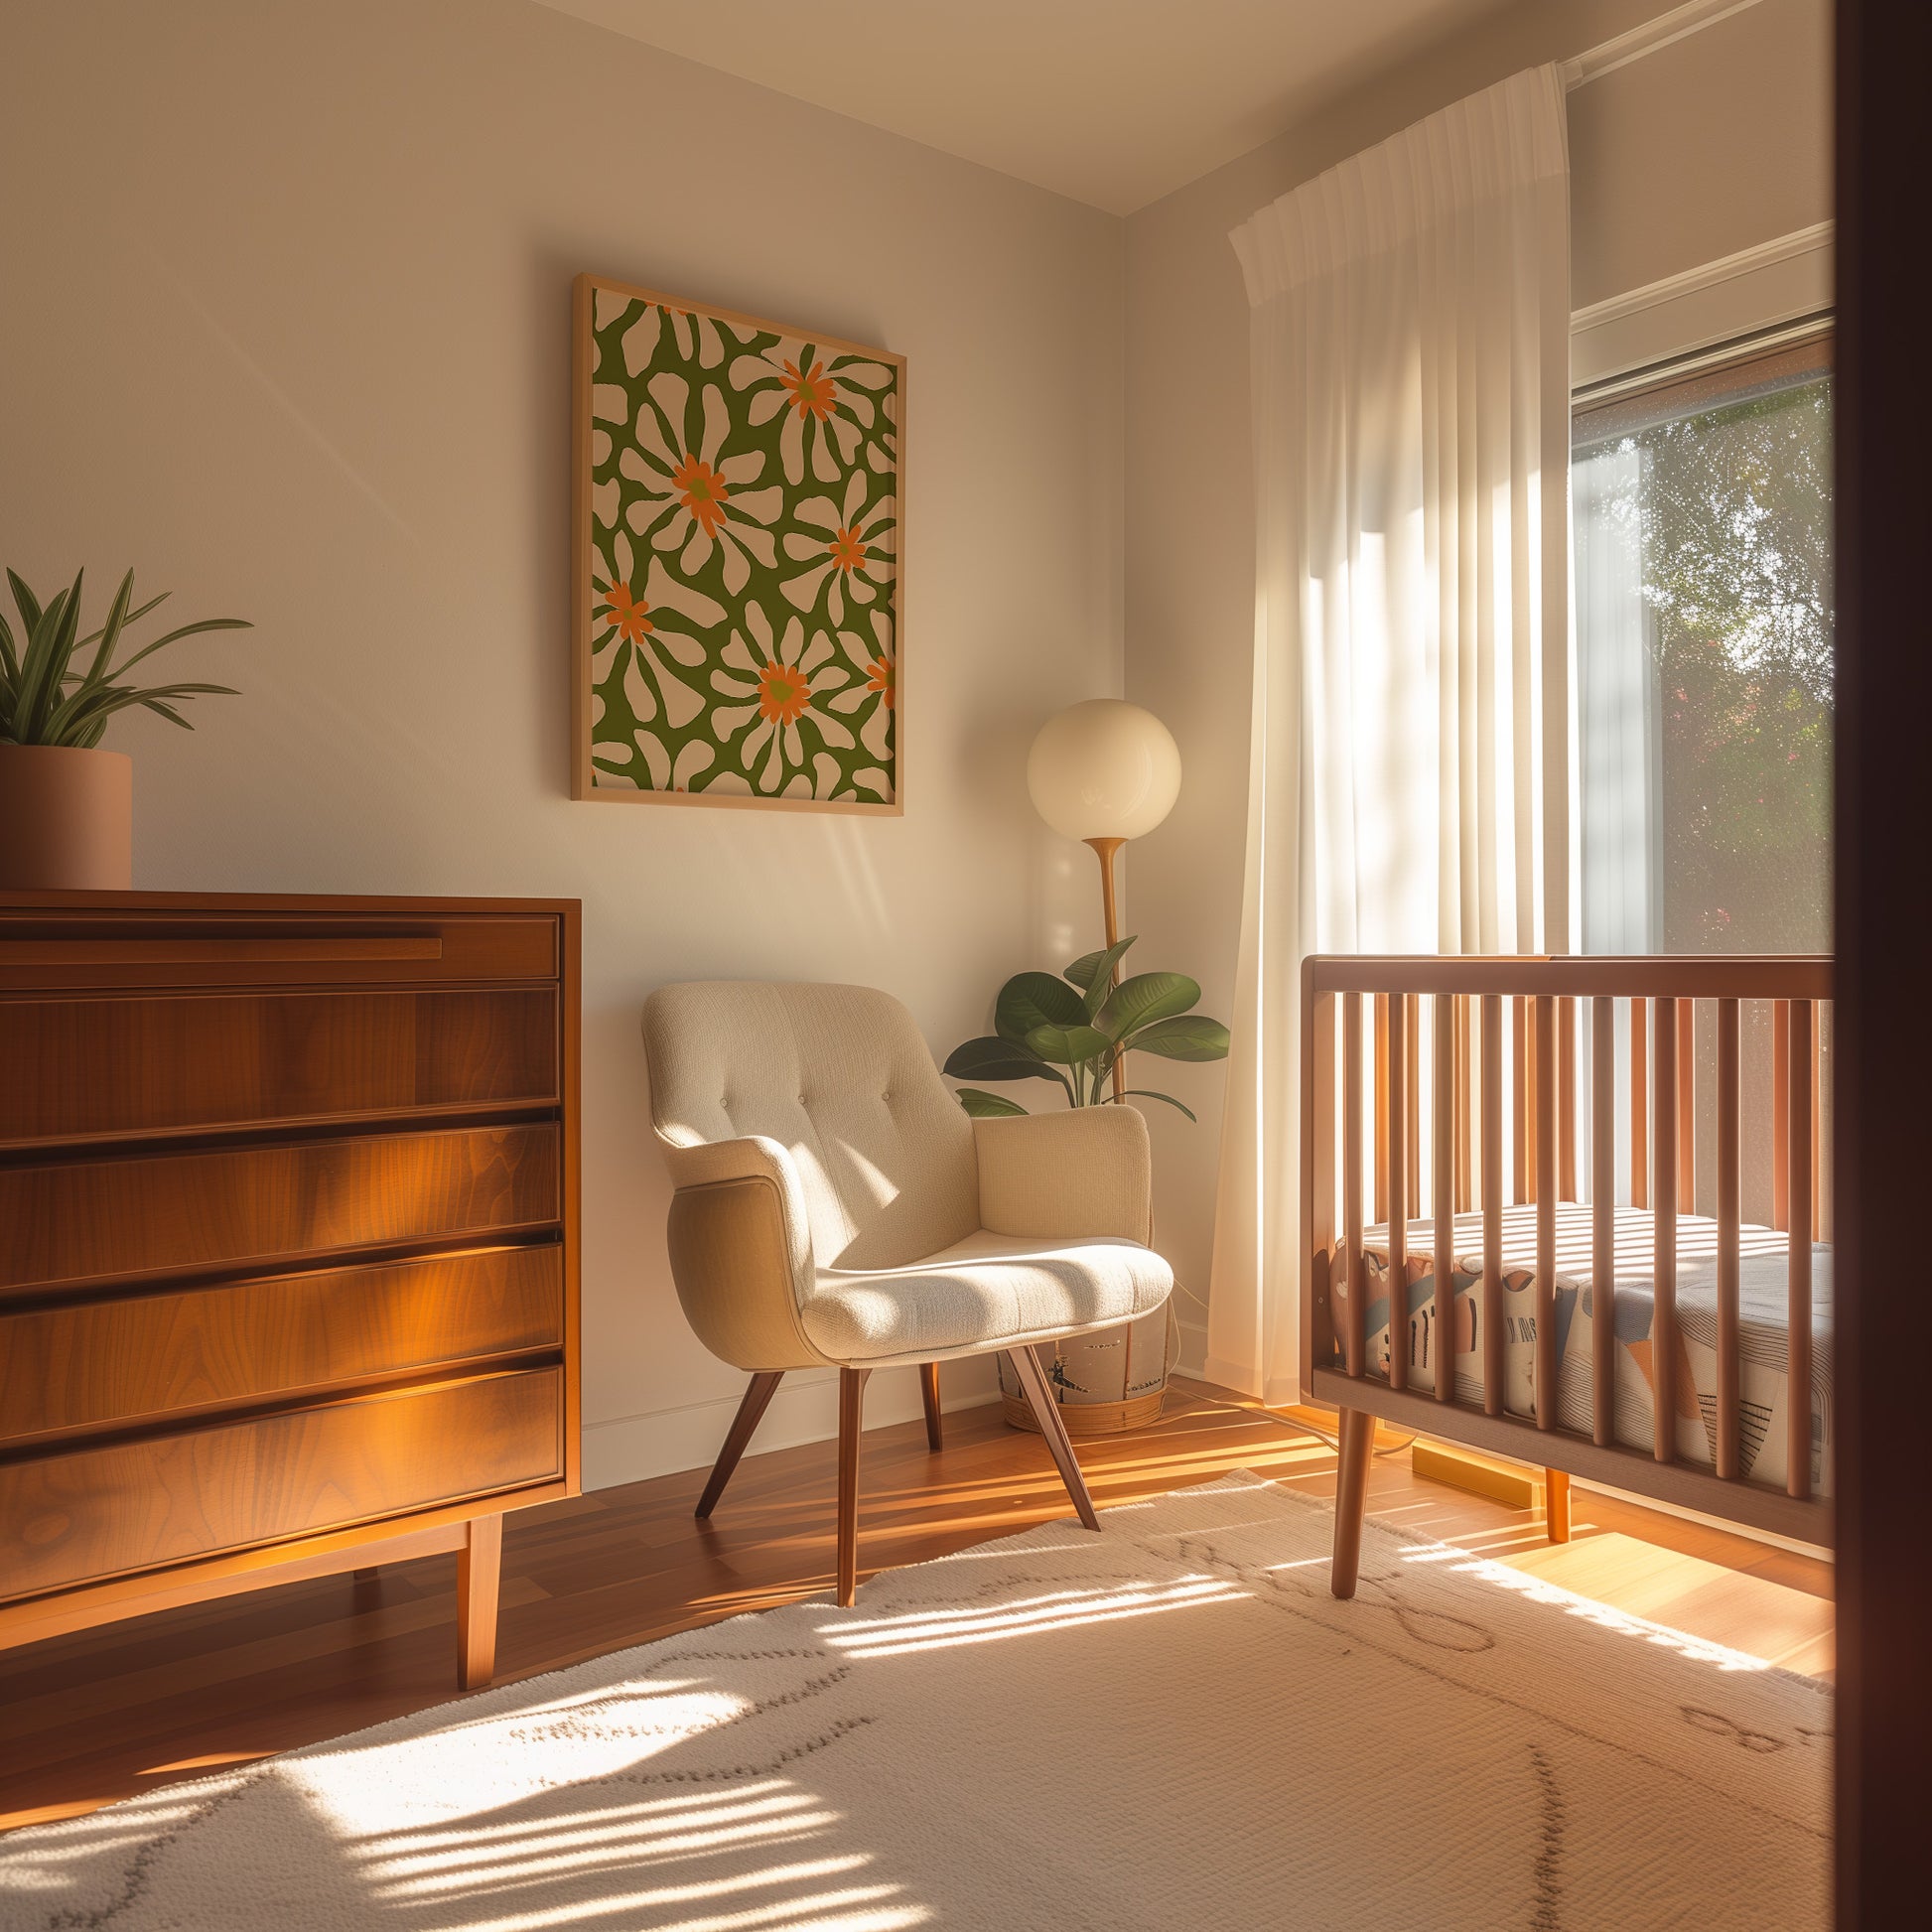 Cozy nursery room with a crib, armchair, and wooden furniture at sunset.